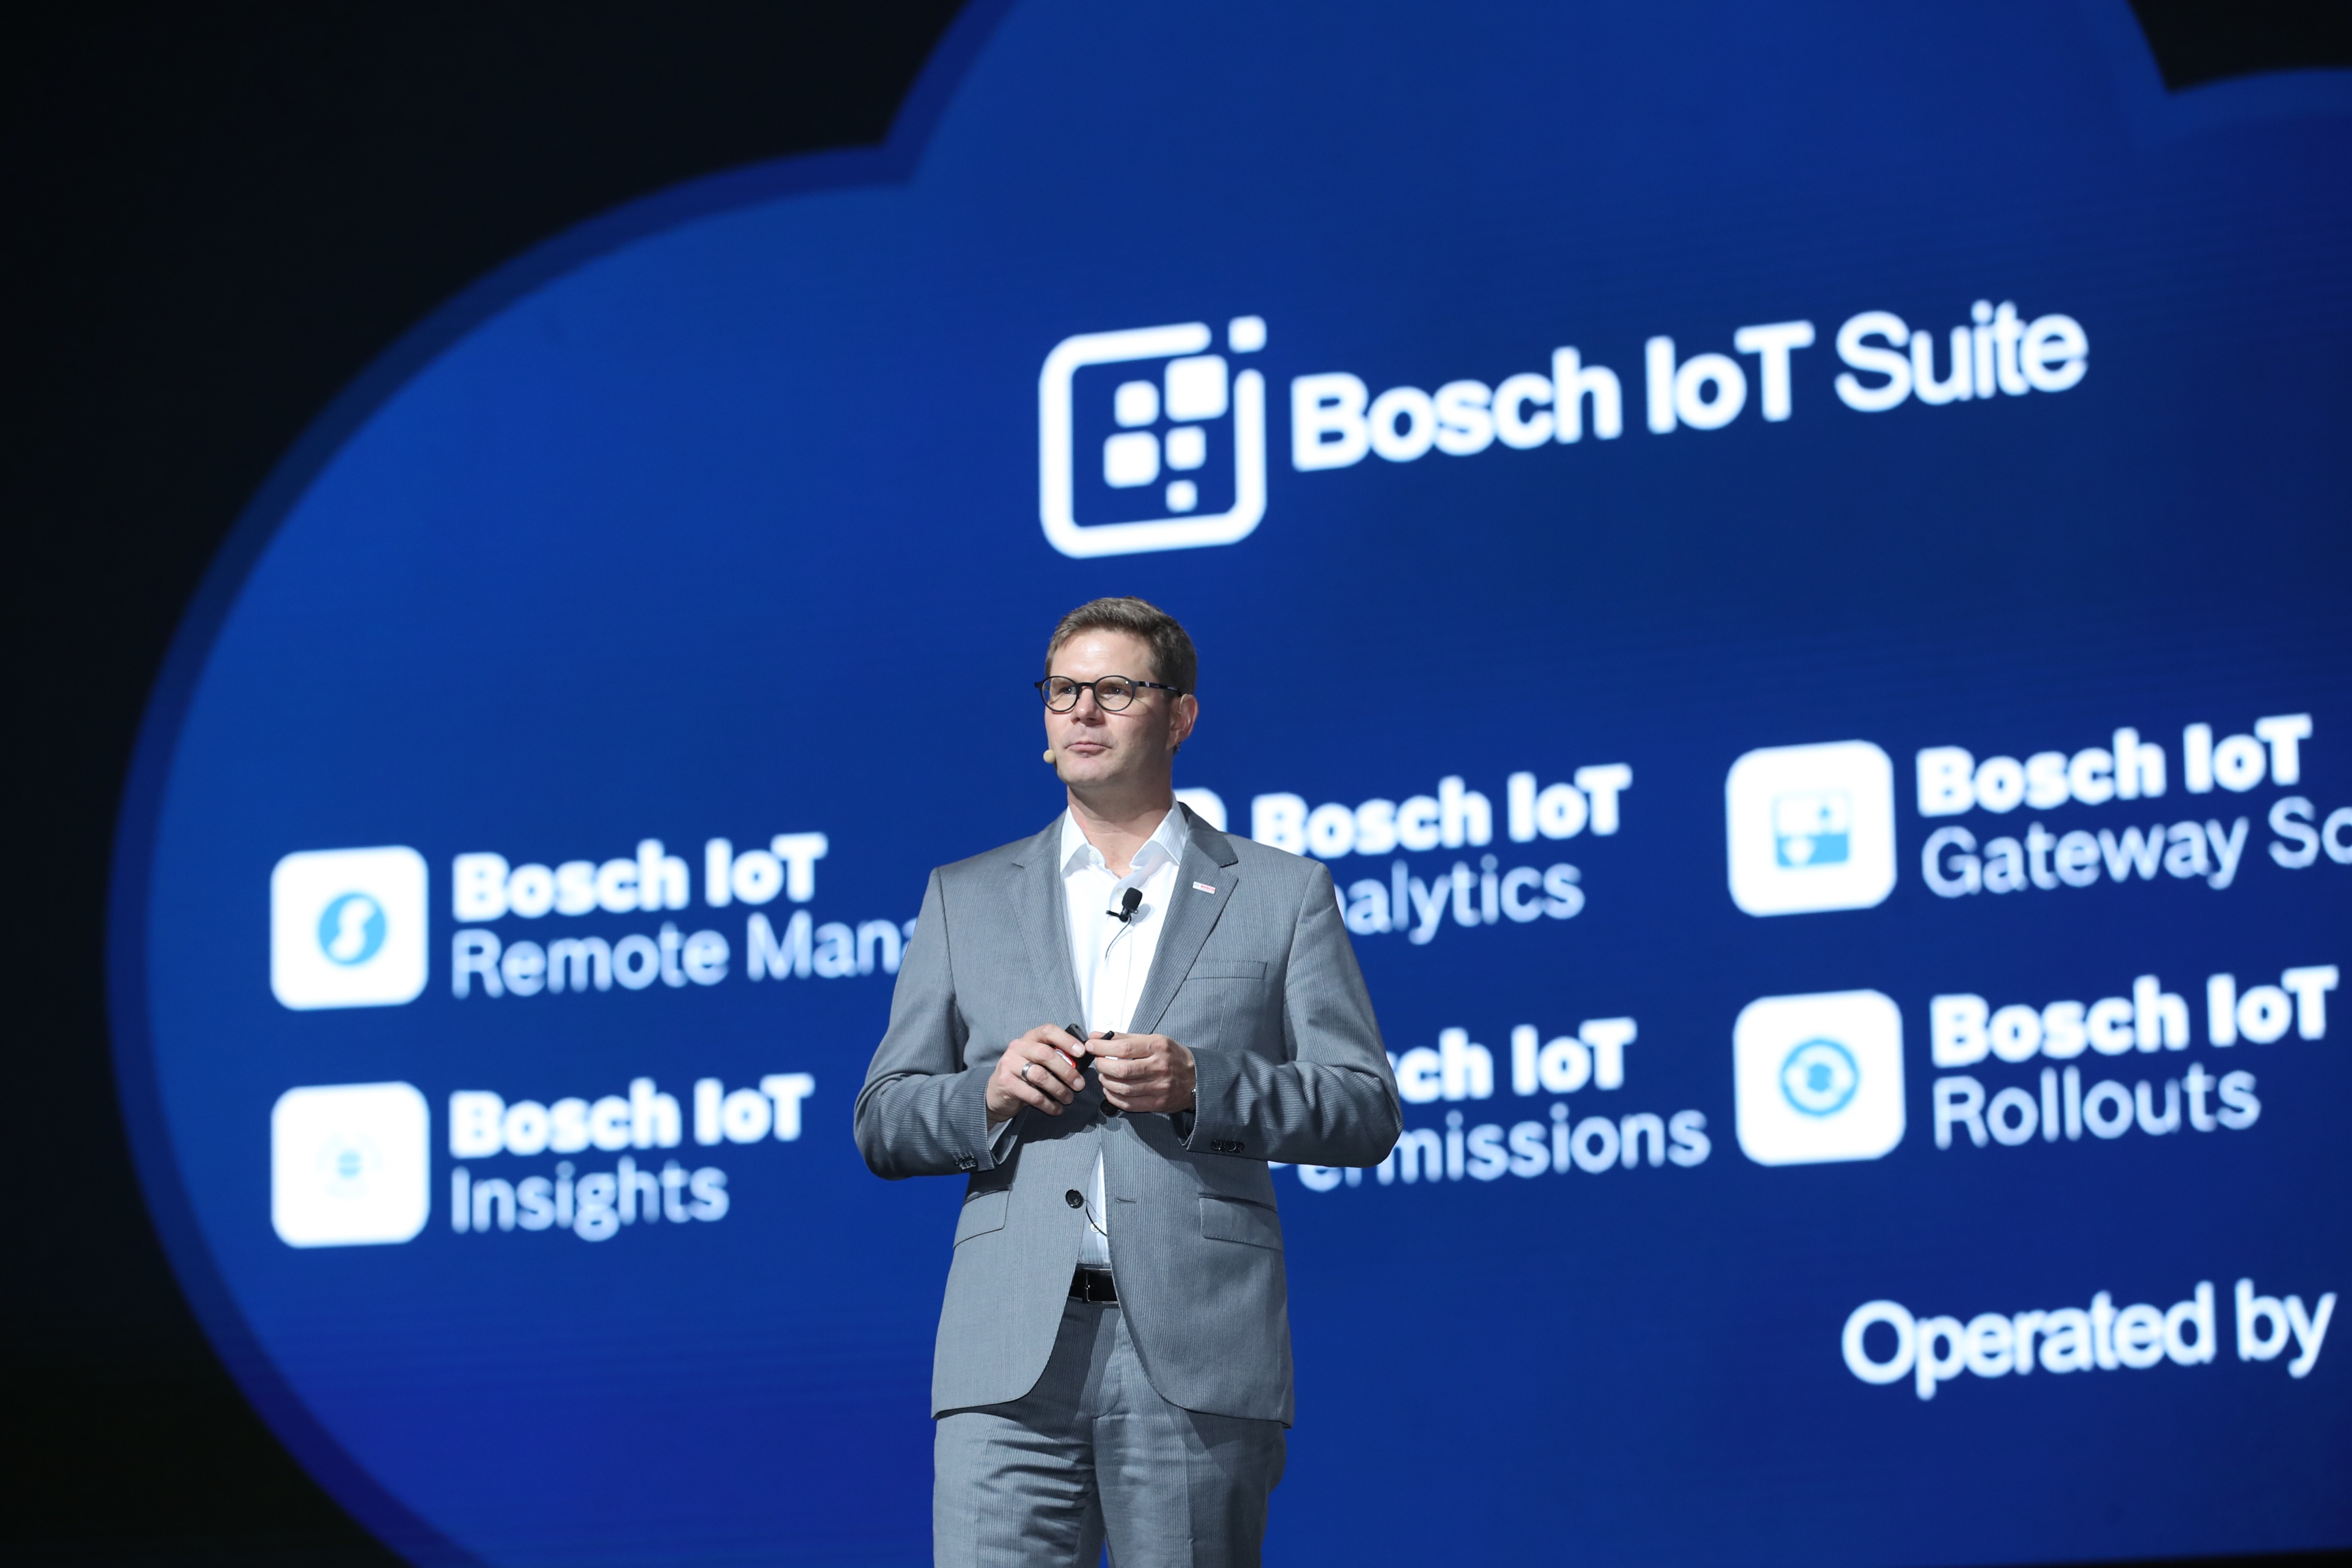 Bosch launches IoT software solutions on Huawei Cloud